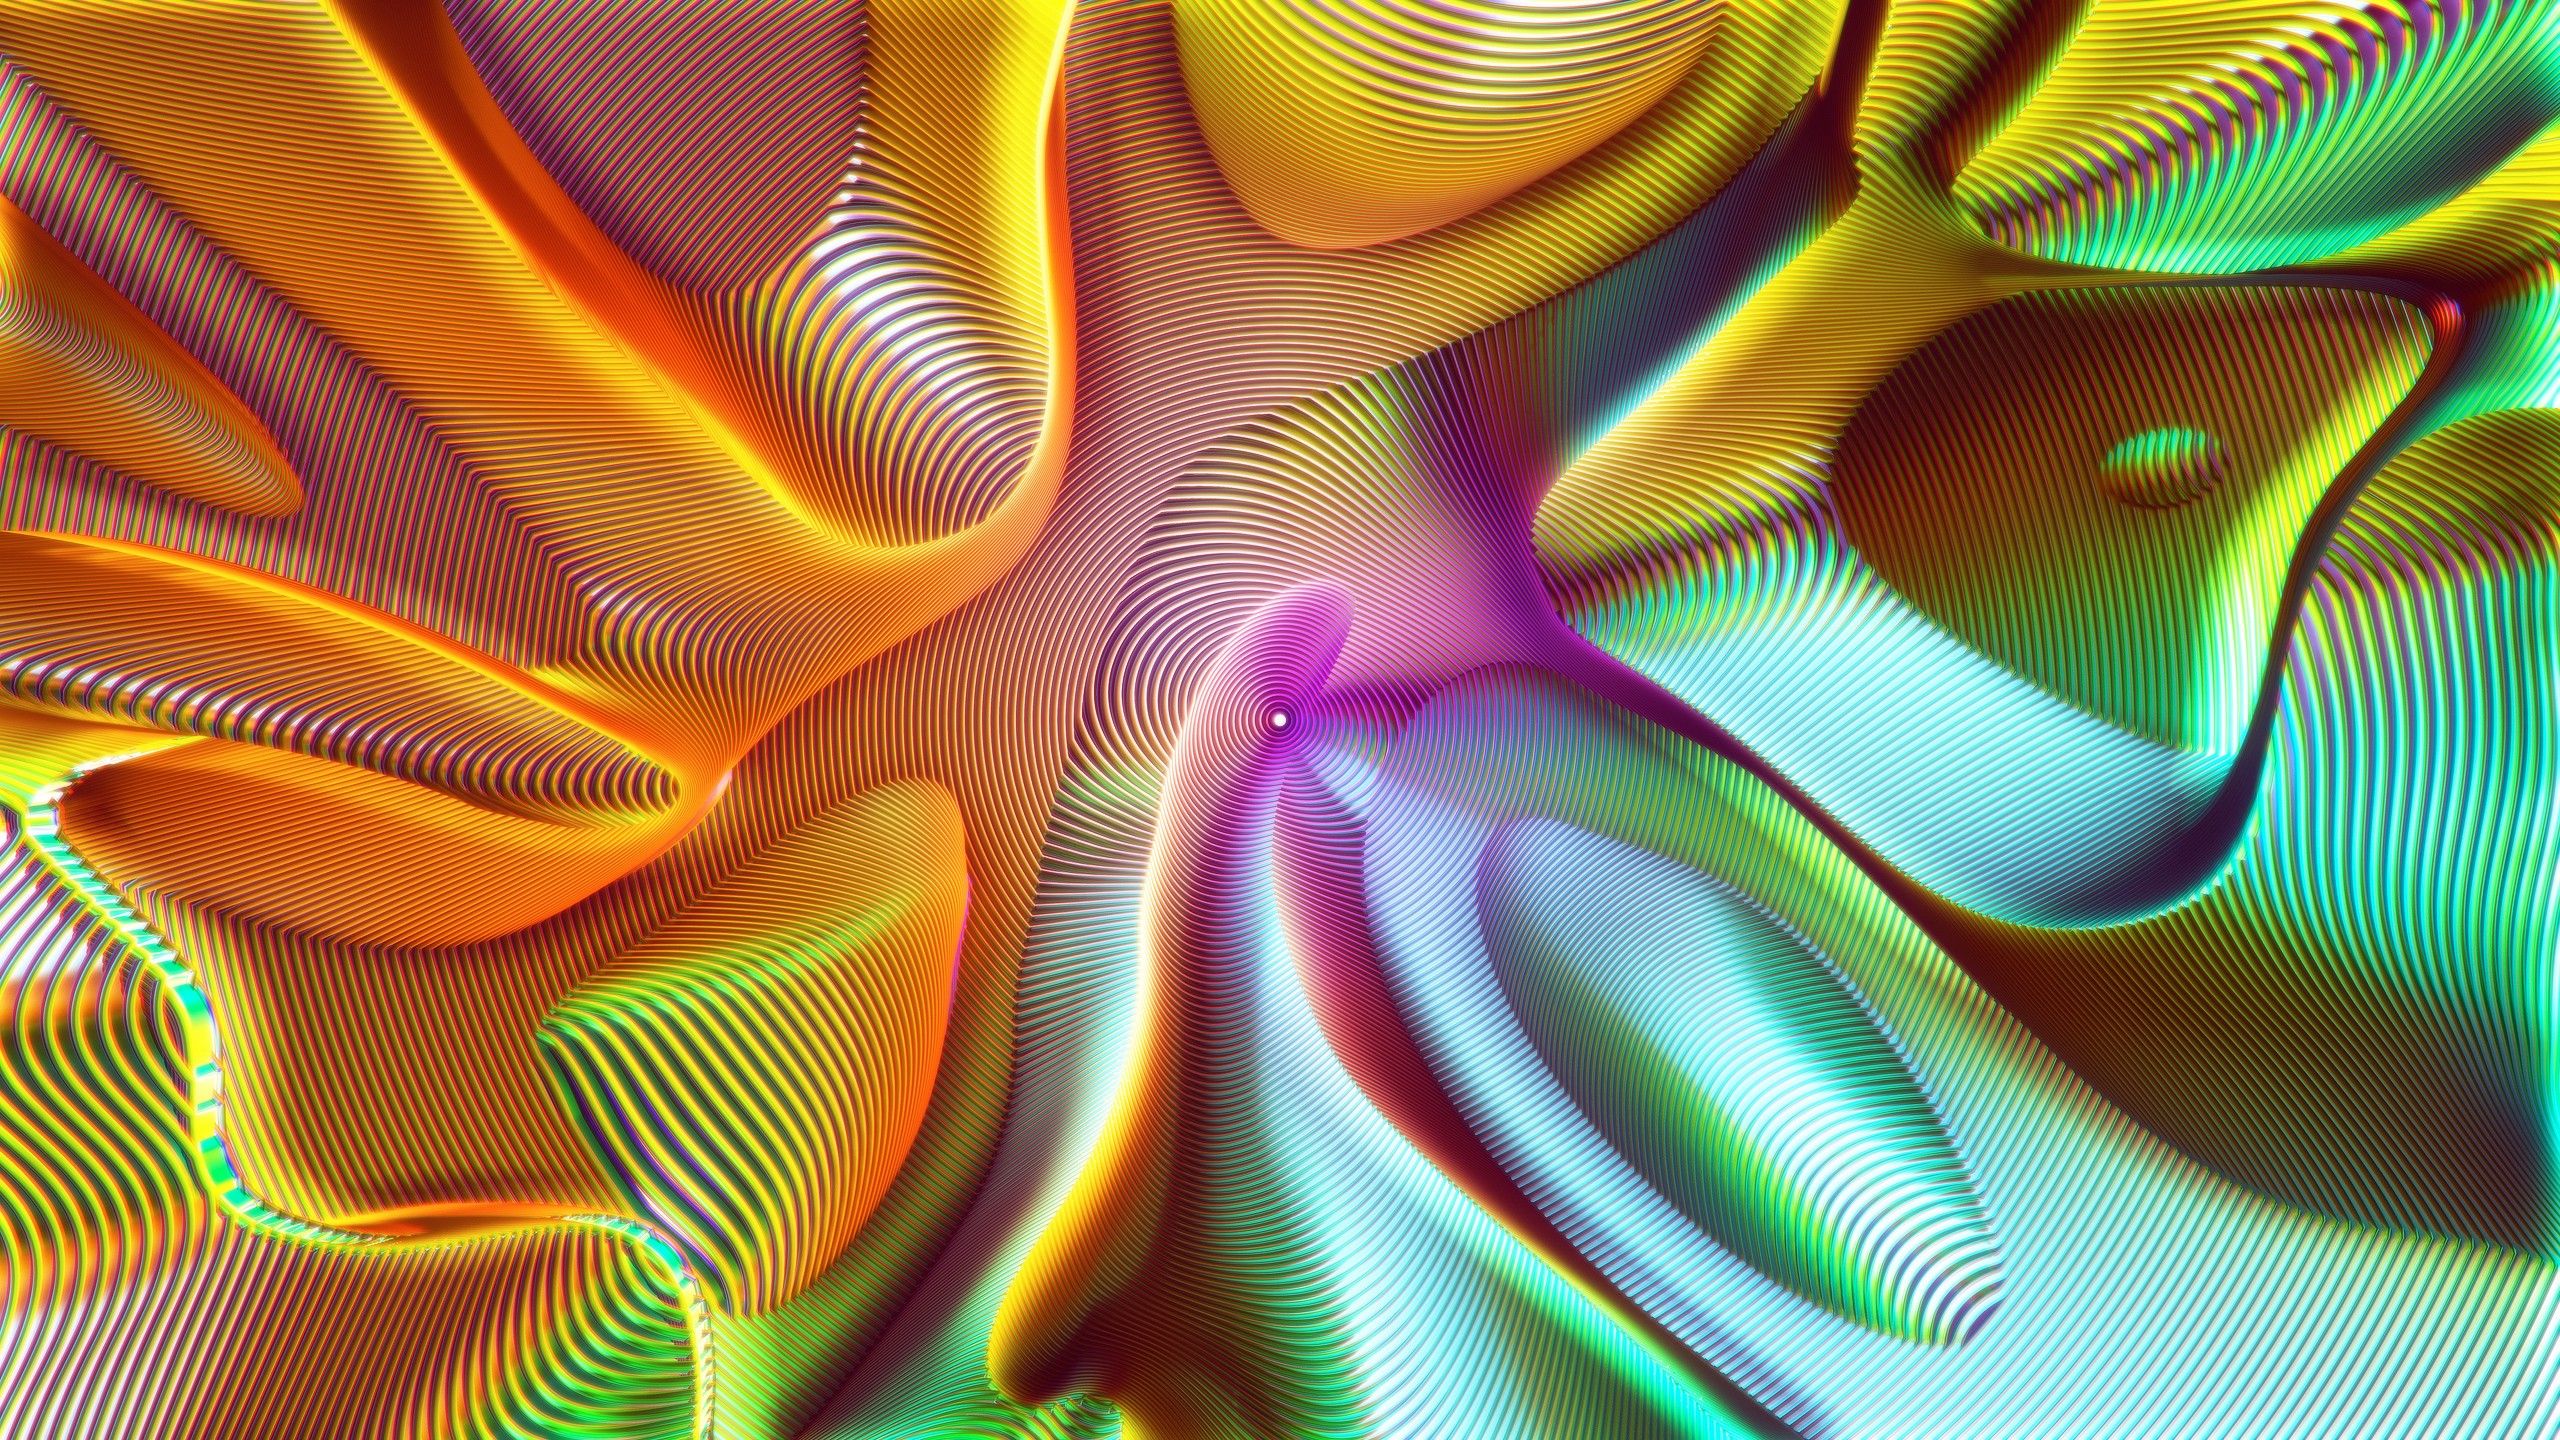 Wallpaper HD, abstract, Wormhole, spiral, Abstract